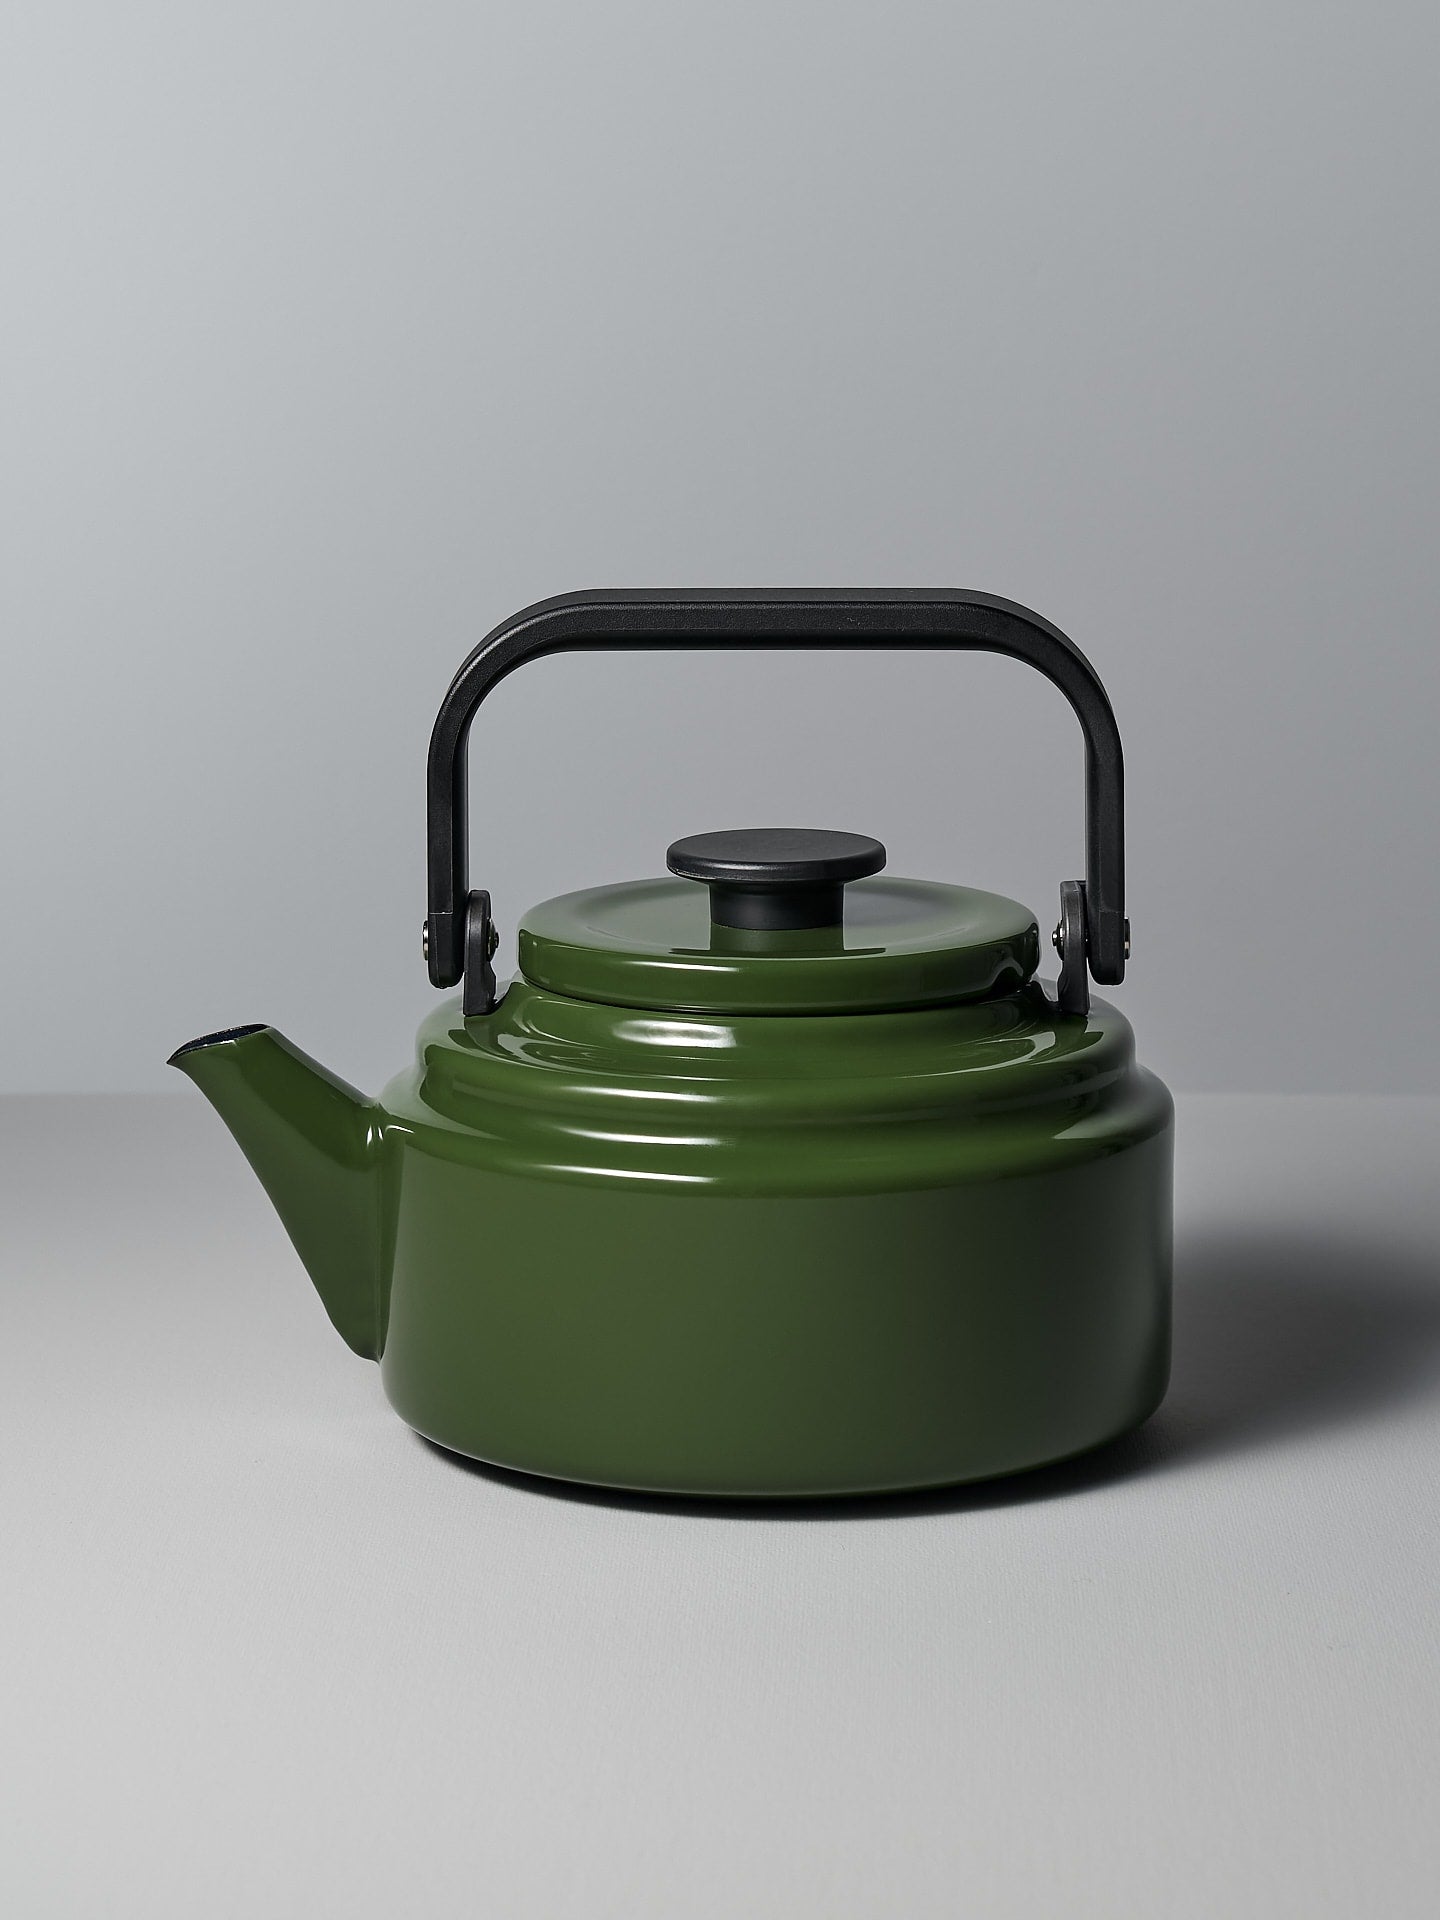 An Amu Stove-top Kettle - Green by Noda Horo on a grey background.